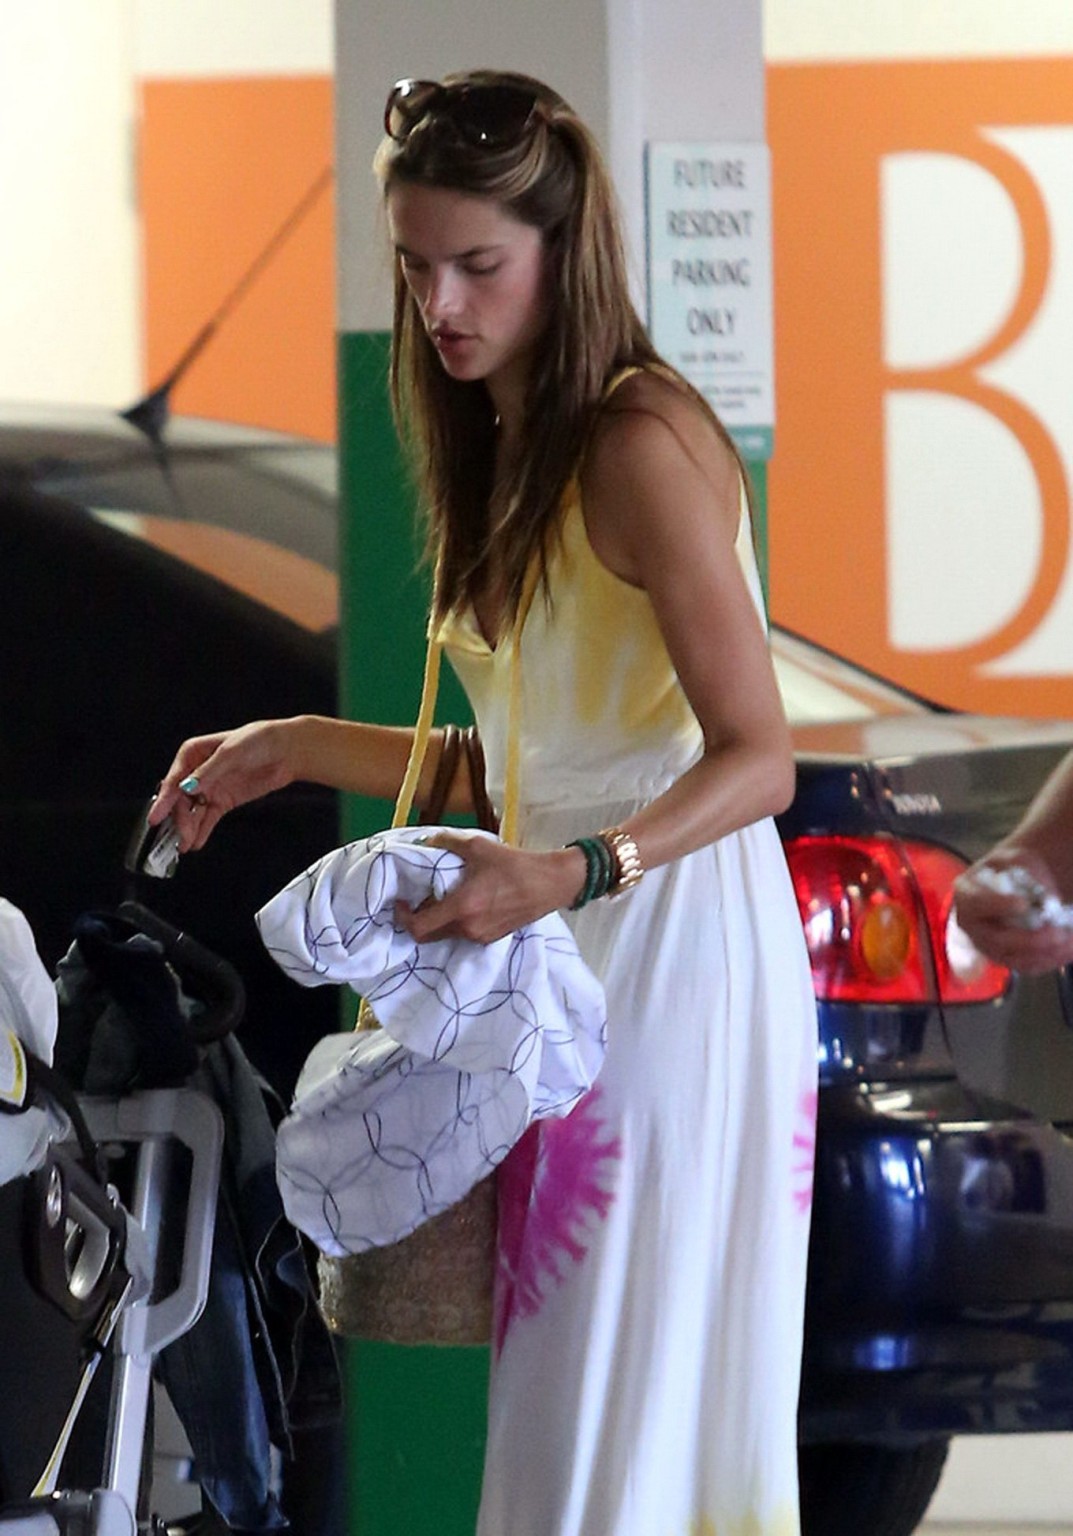 Alessandra Ambrosio downblouse nip slip while shopping in West Hollywood #75252603